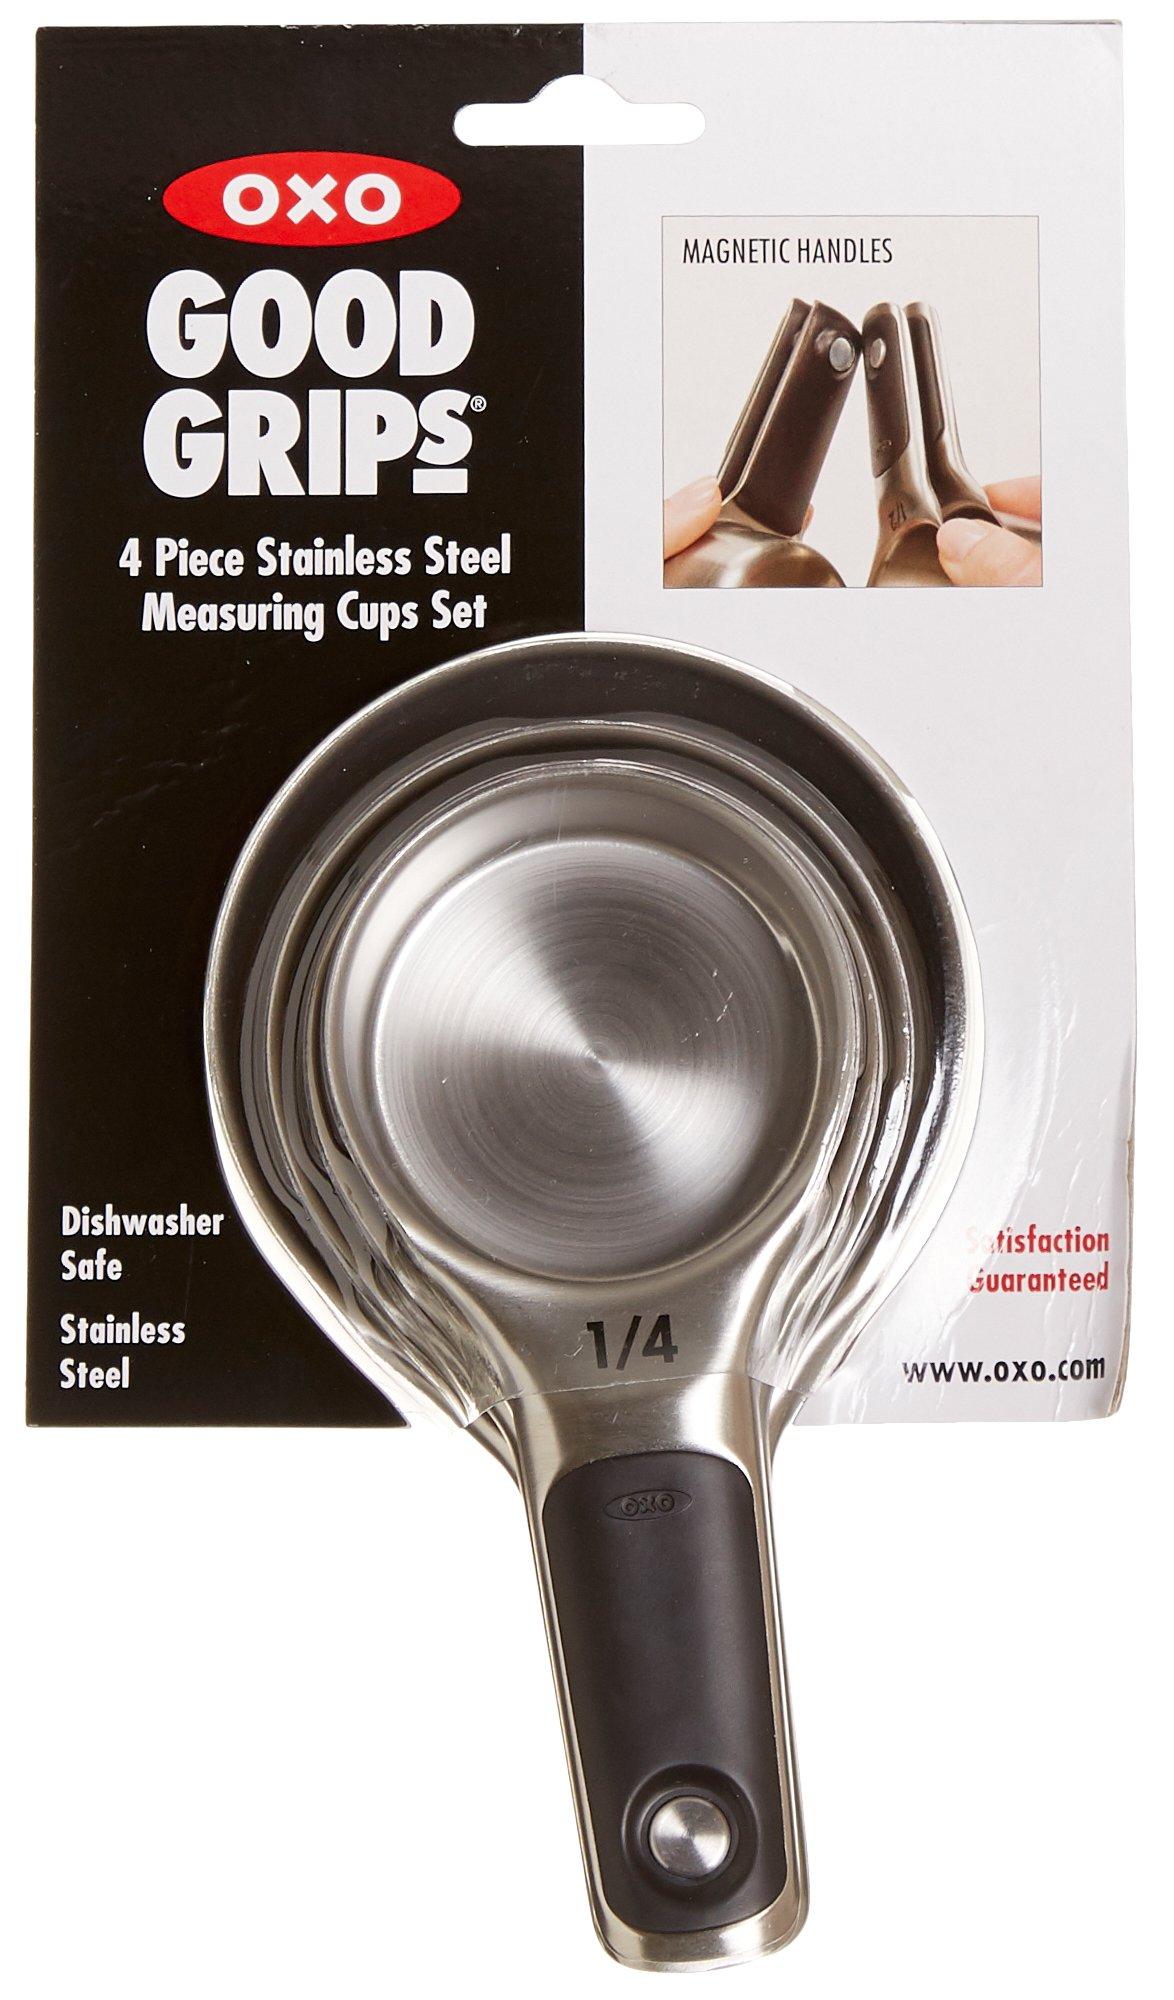  OXO Good Grips 4 Piece Stainless Steel Measuring